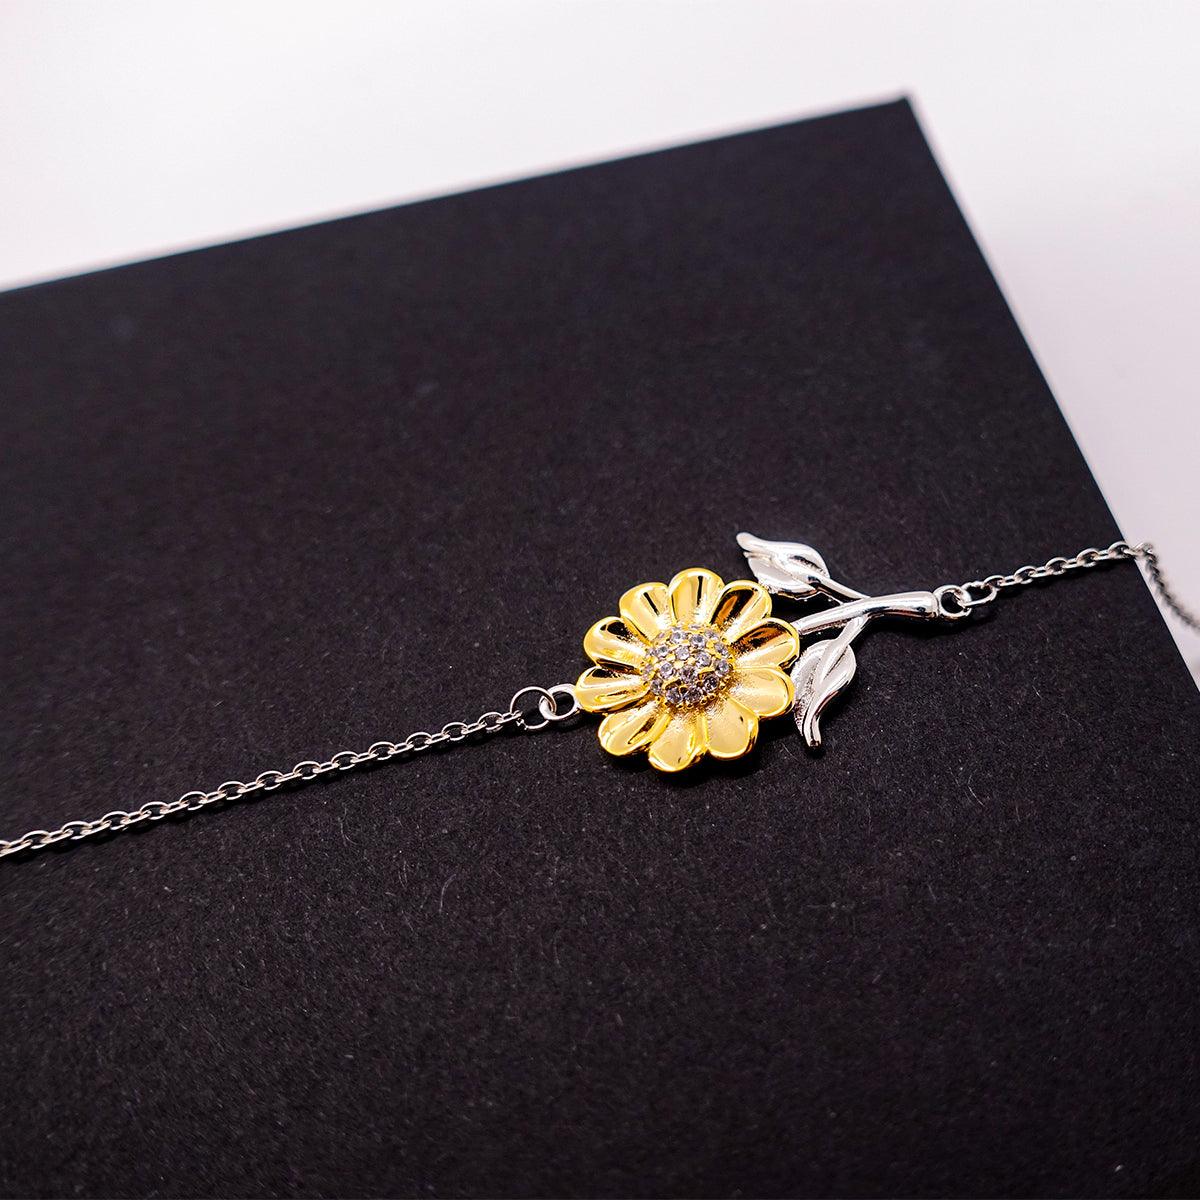 Remarkable Pediatrician Gifts, Your dedication and hard work, Inspirational Birthday Christmas Unique Sunflower Bracelet For Pediatrician, Coworkers, Men, Women, Friends - Mallard Moon Gift Shop